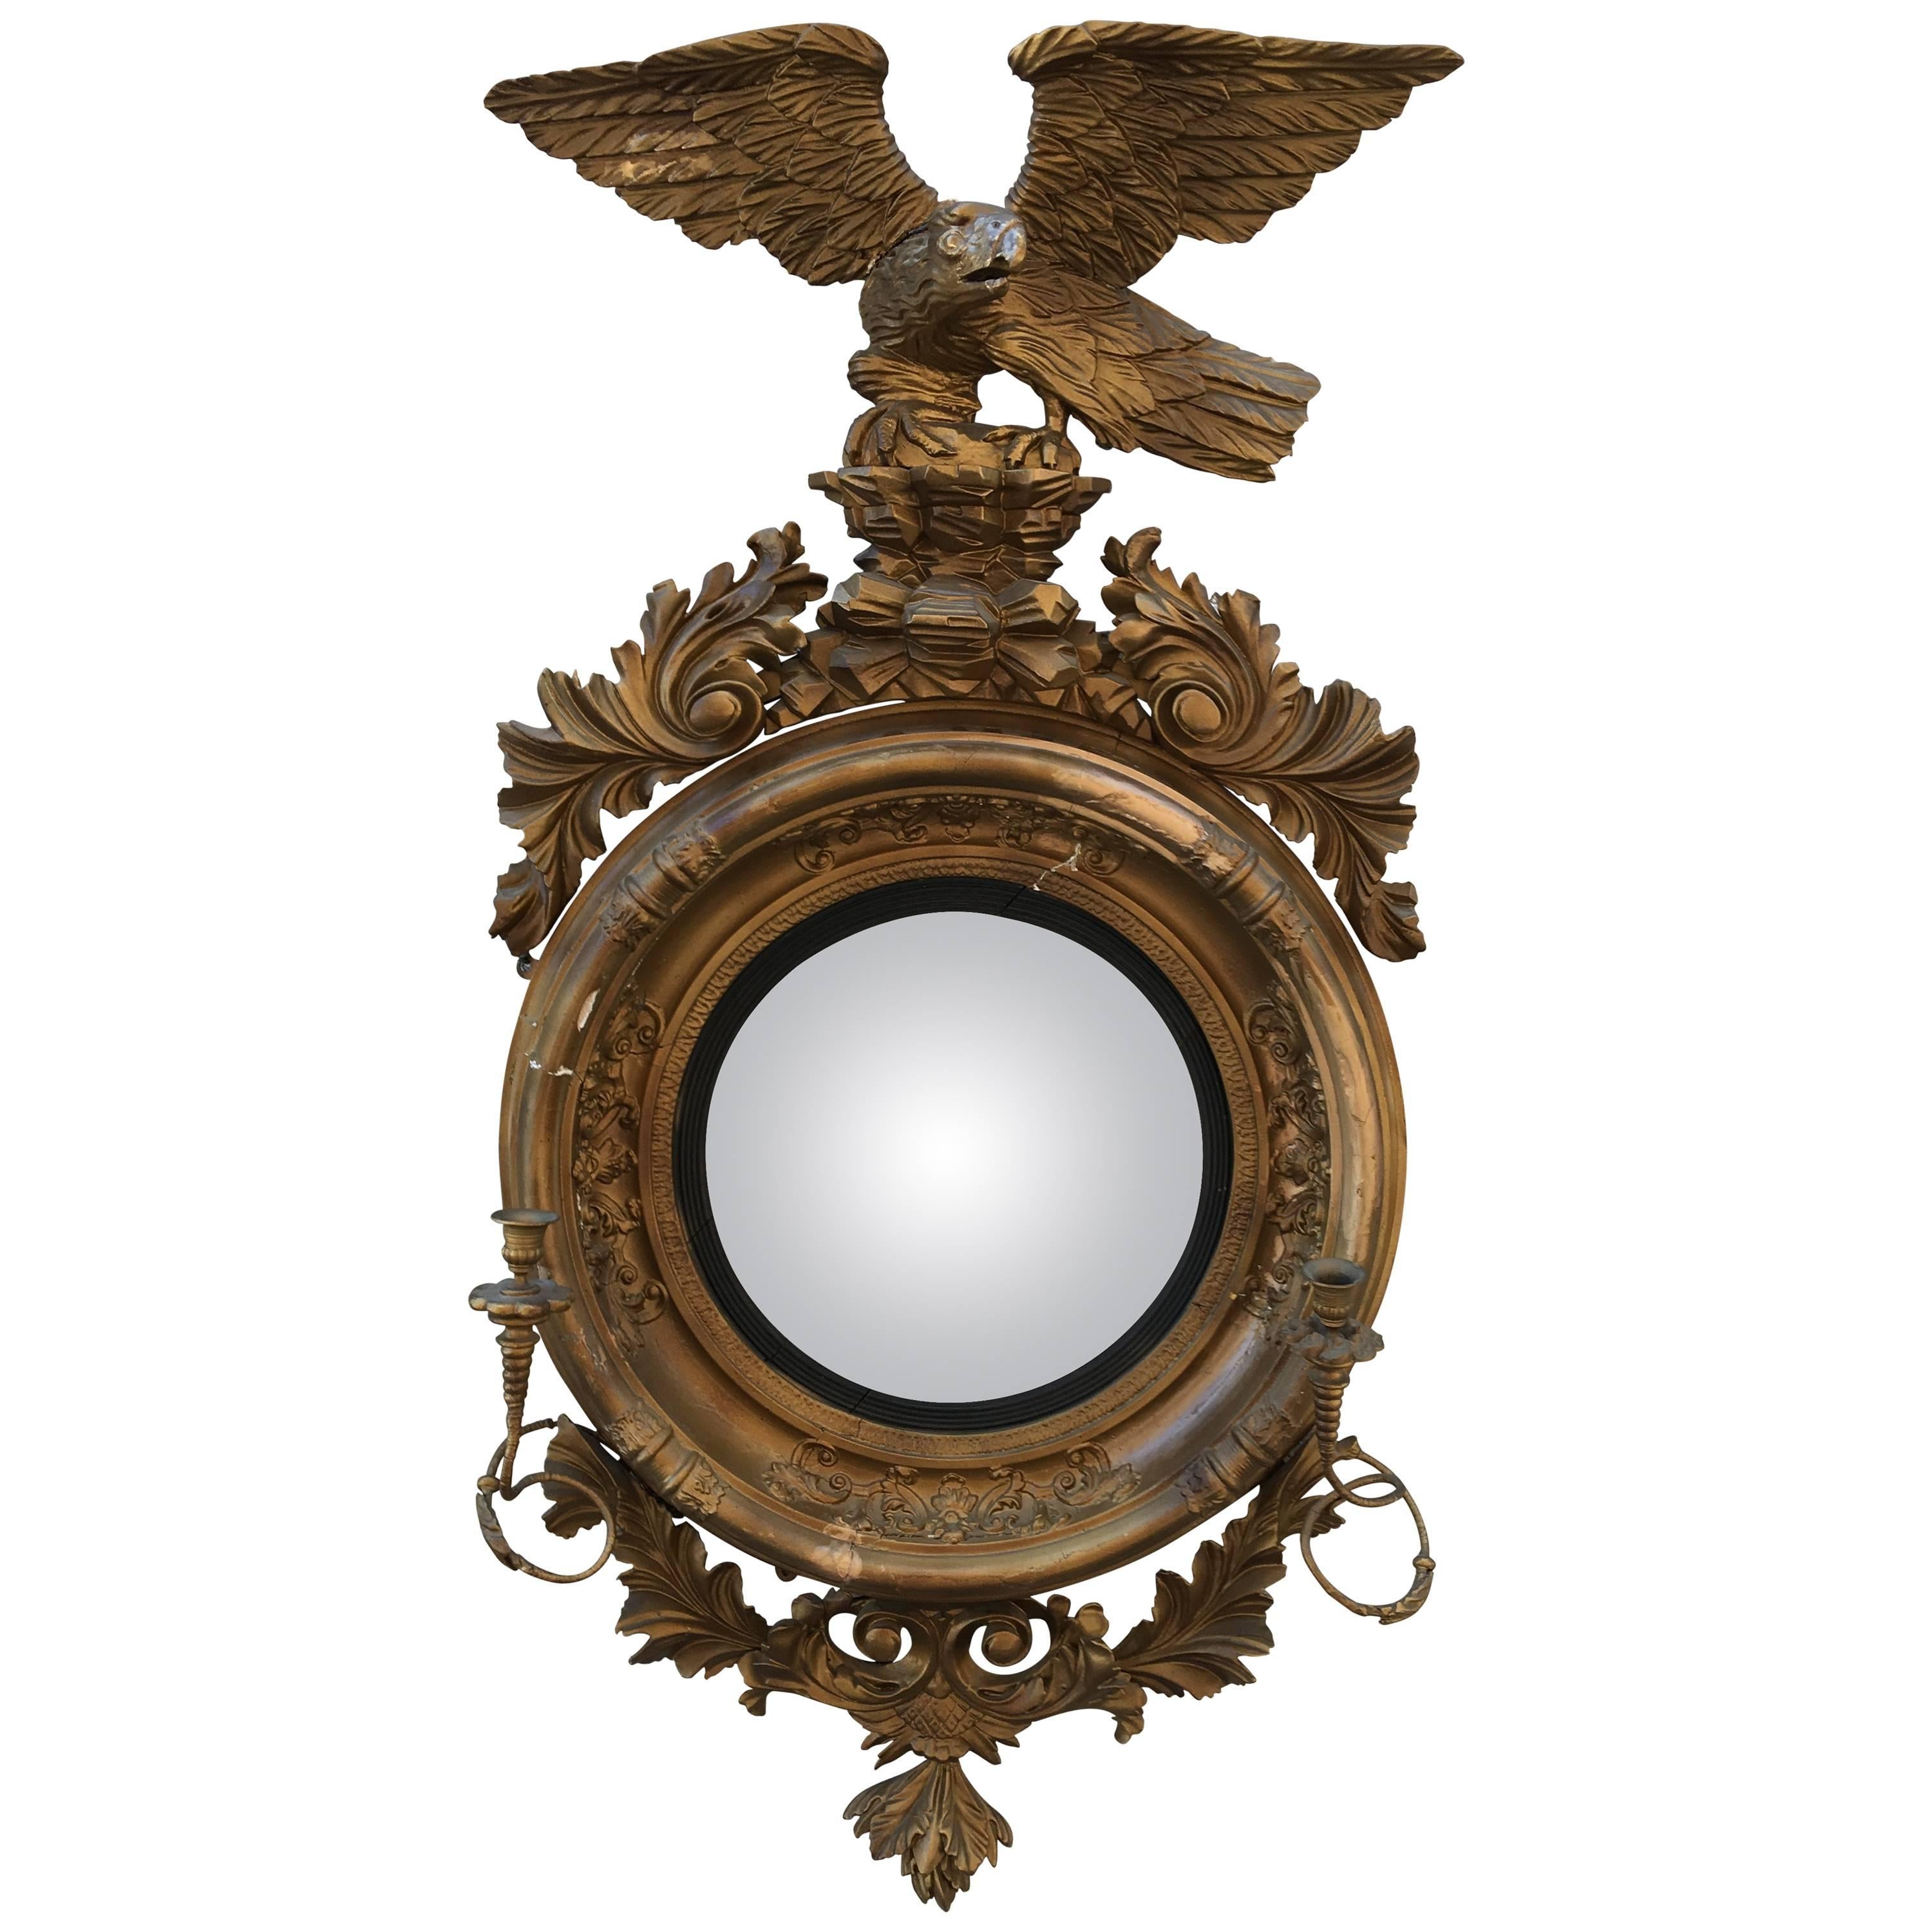 English Convex Mirror with Large Eagle and Candelabra Arms, circa 1850